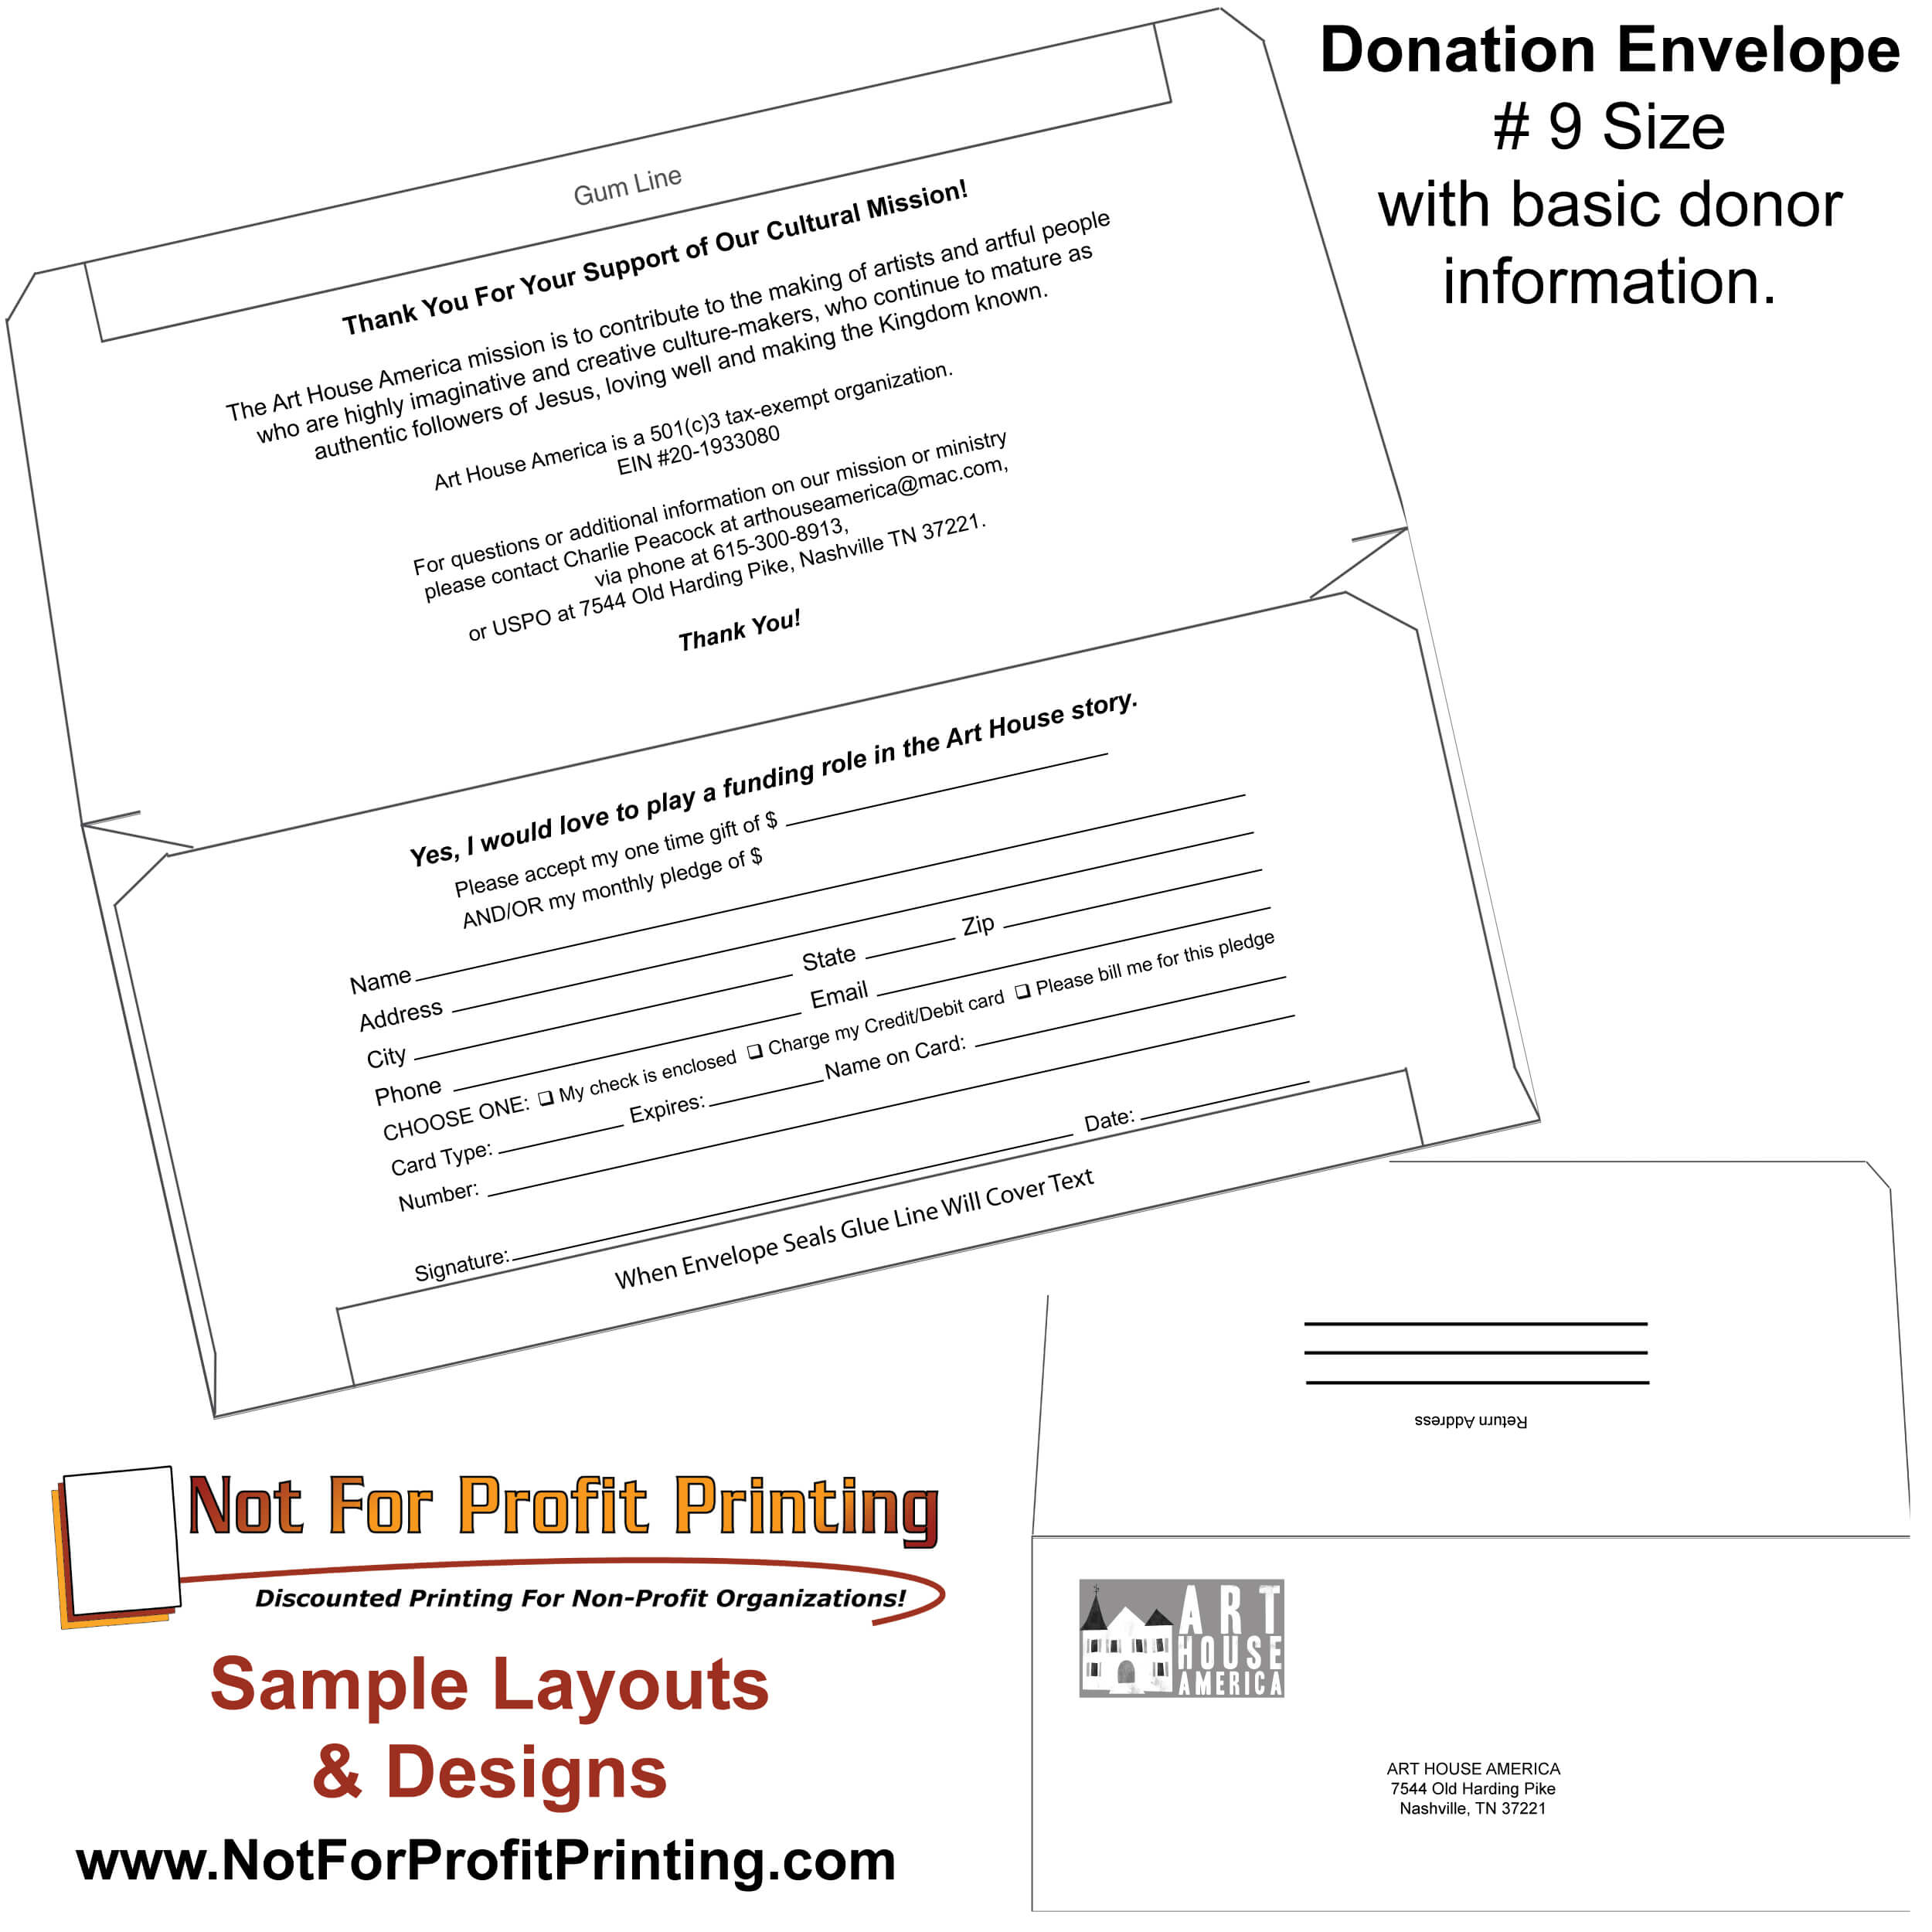 Sample Layouts & Designs For Donation Envelopes And Pertaining To Donation Cards Template